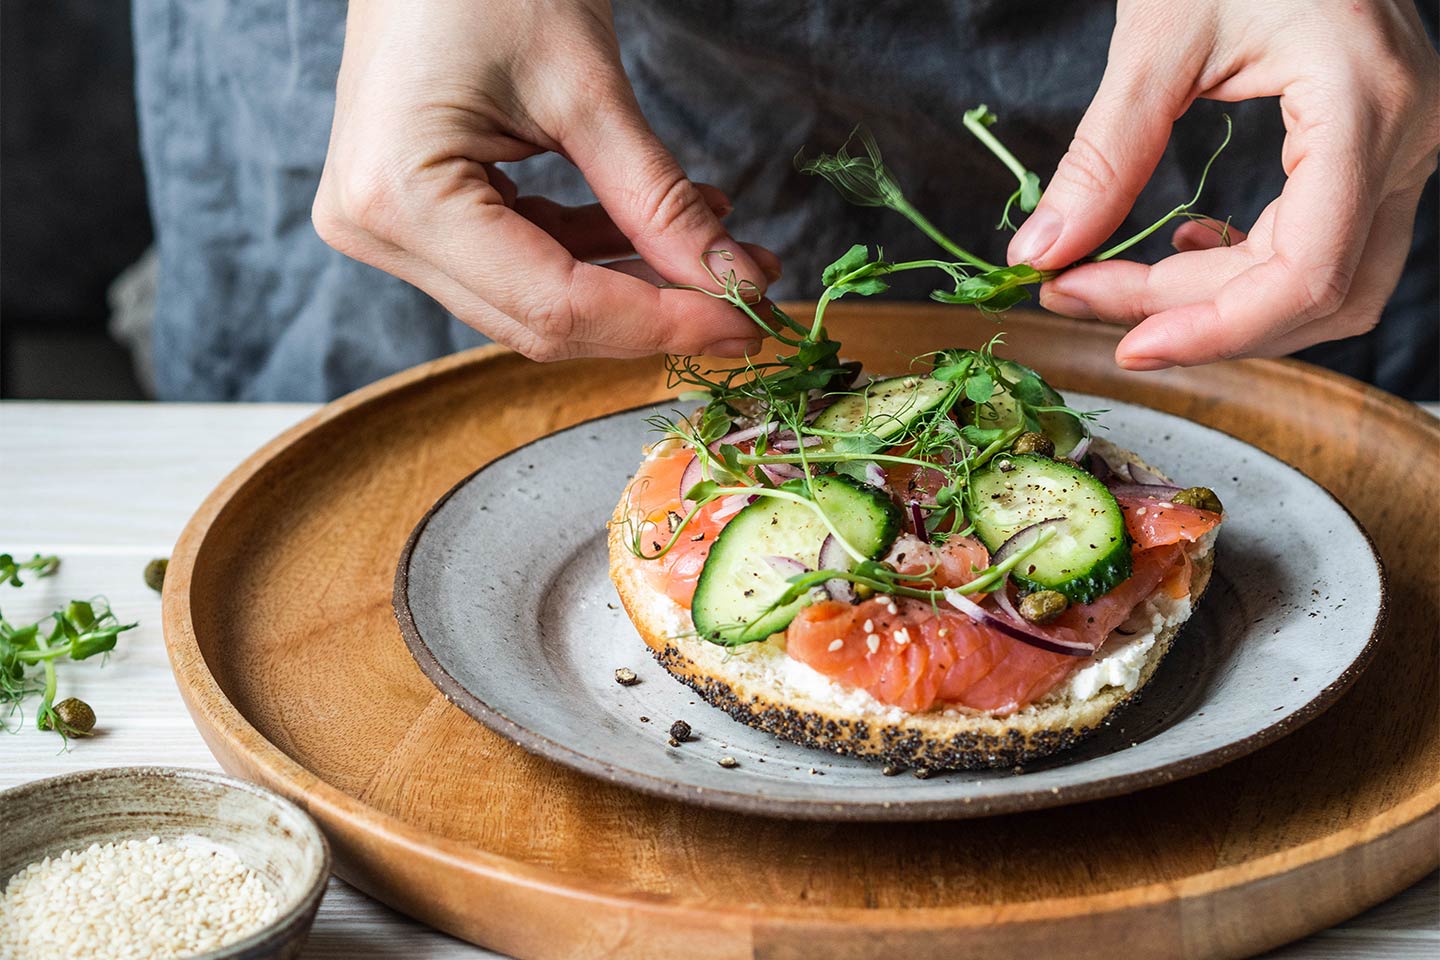 woman fixing a bagel with smoked salmon